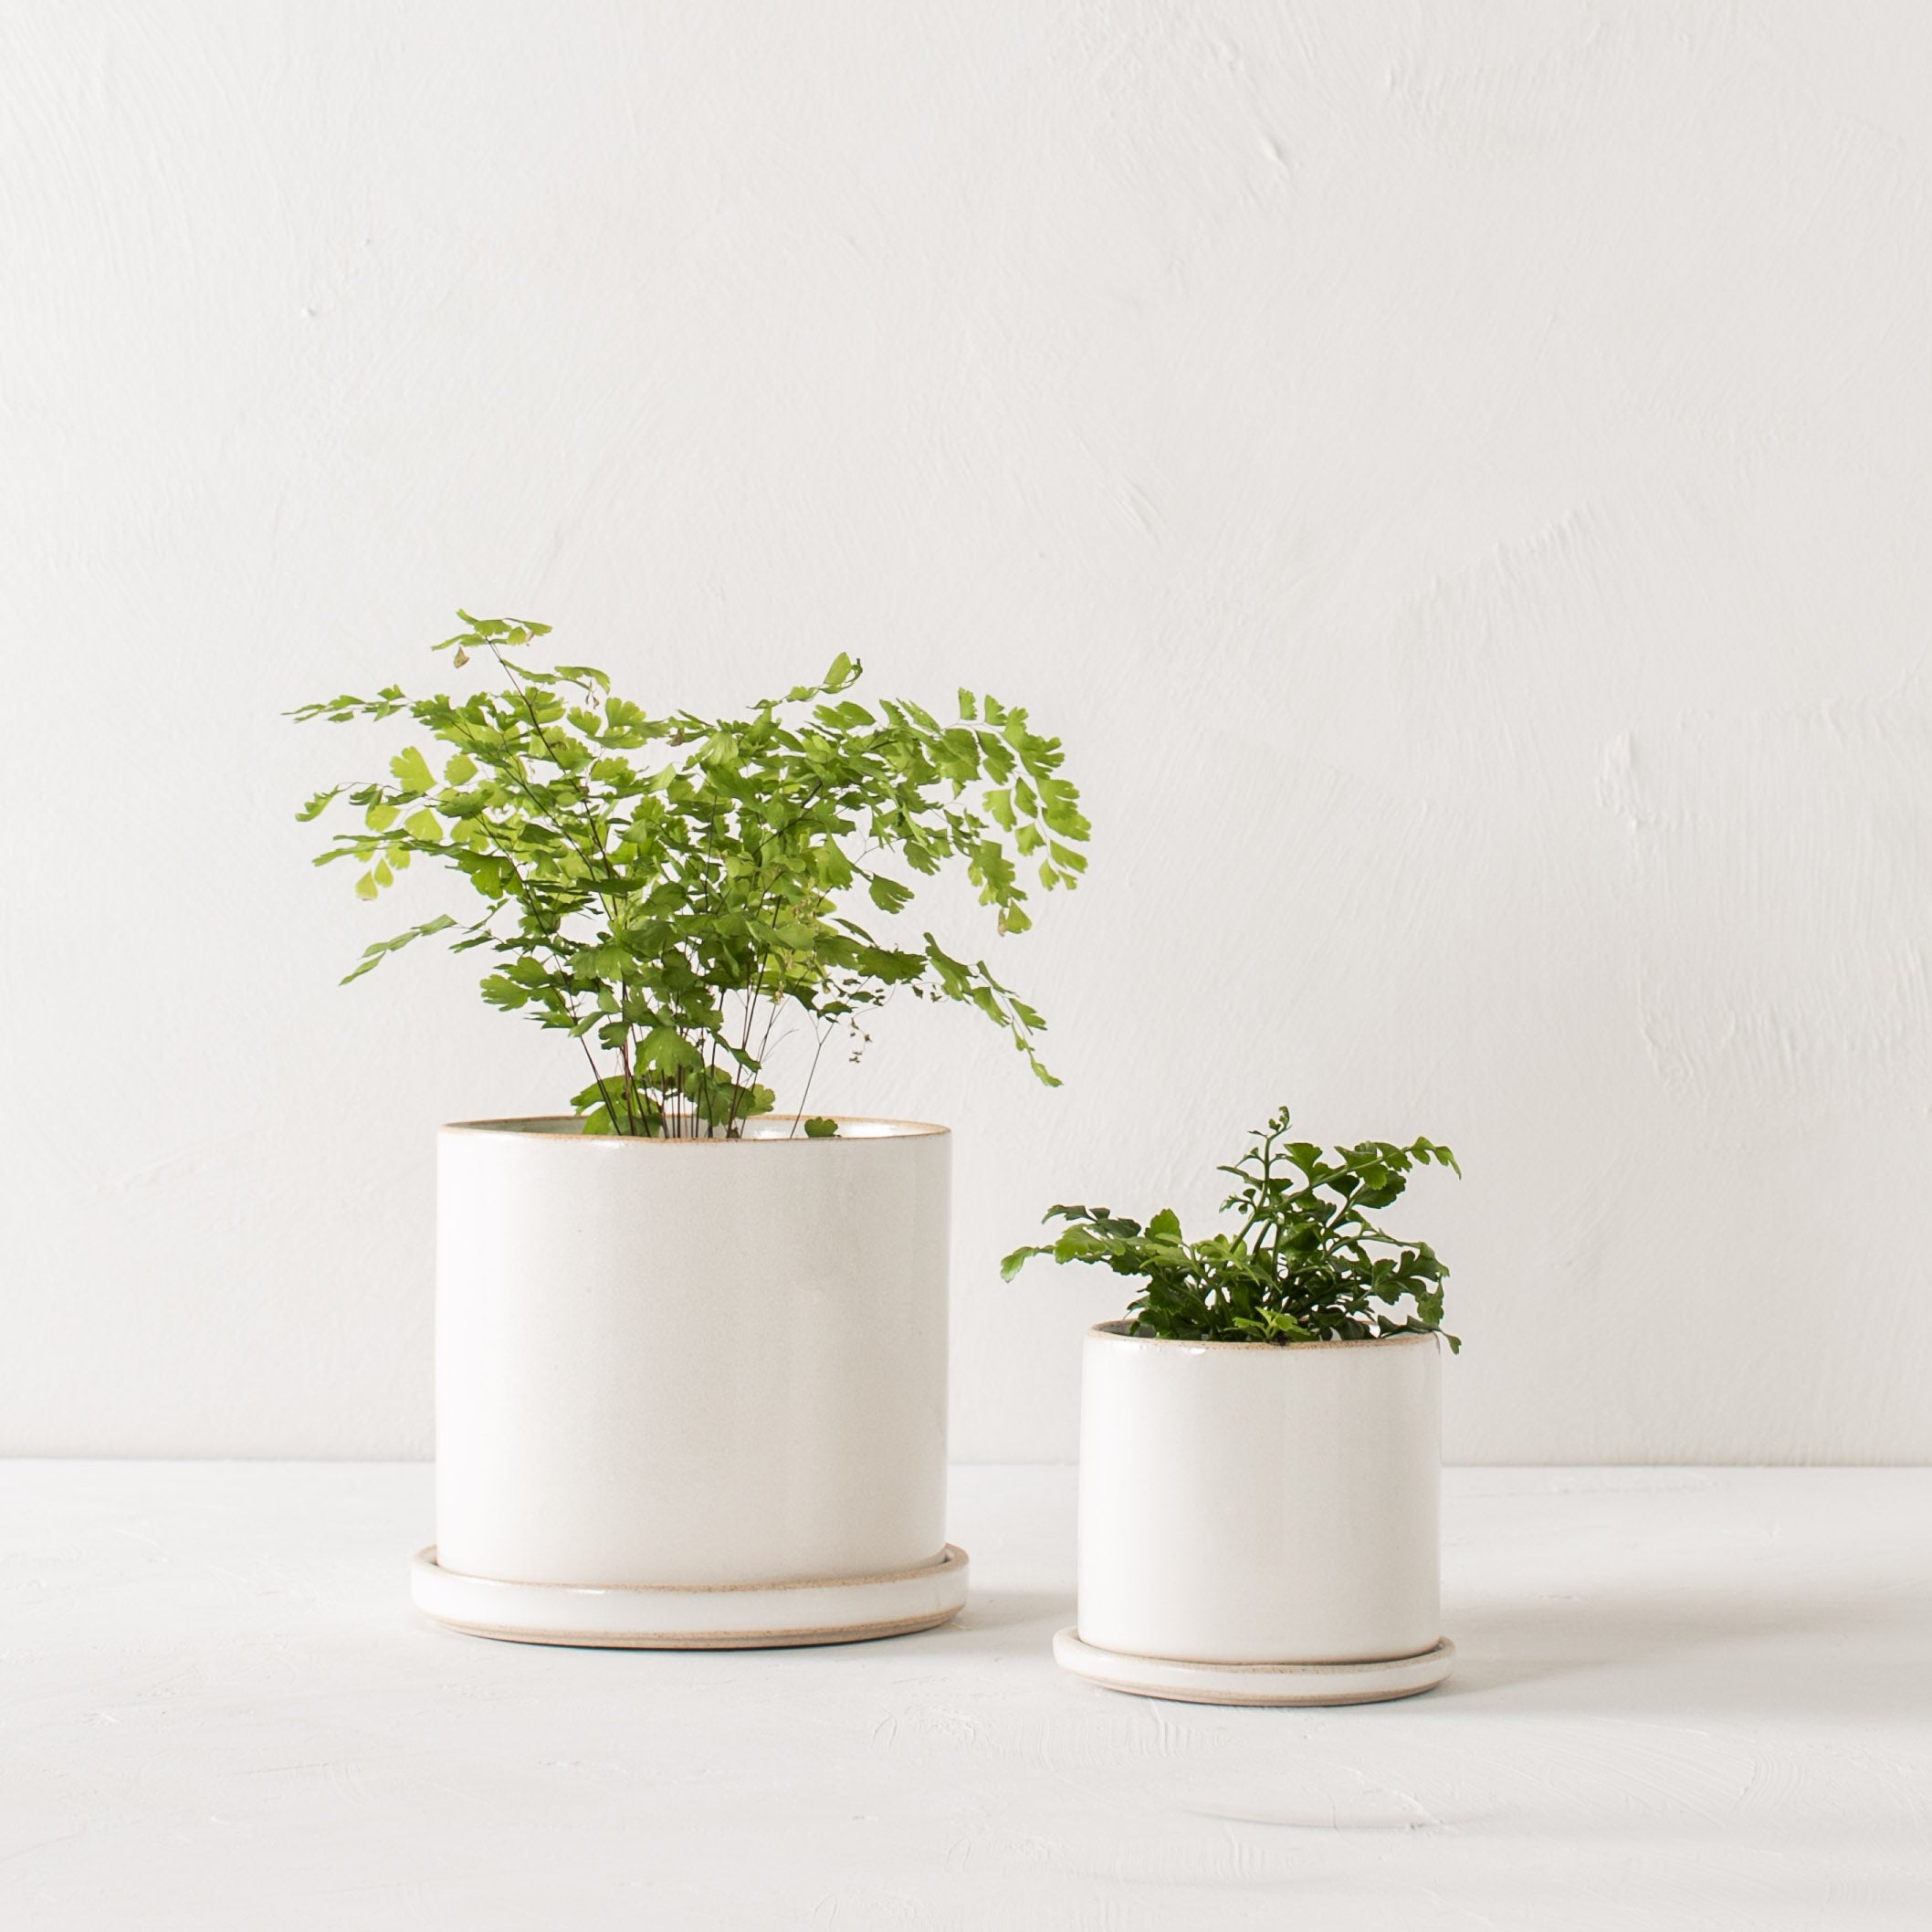 Two minimal white ceramic planters, they have exposed stoneware rims and bases. Both planters have plants inside as well as bottom drainage dishes. Handmade ceramic planters designed by Convivial Production, Shop Verdant, Kansas City, Mo plant store.